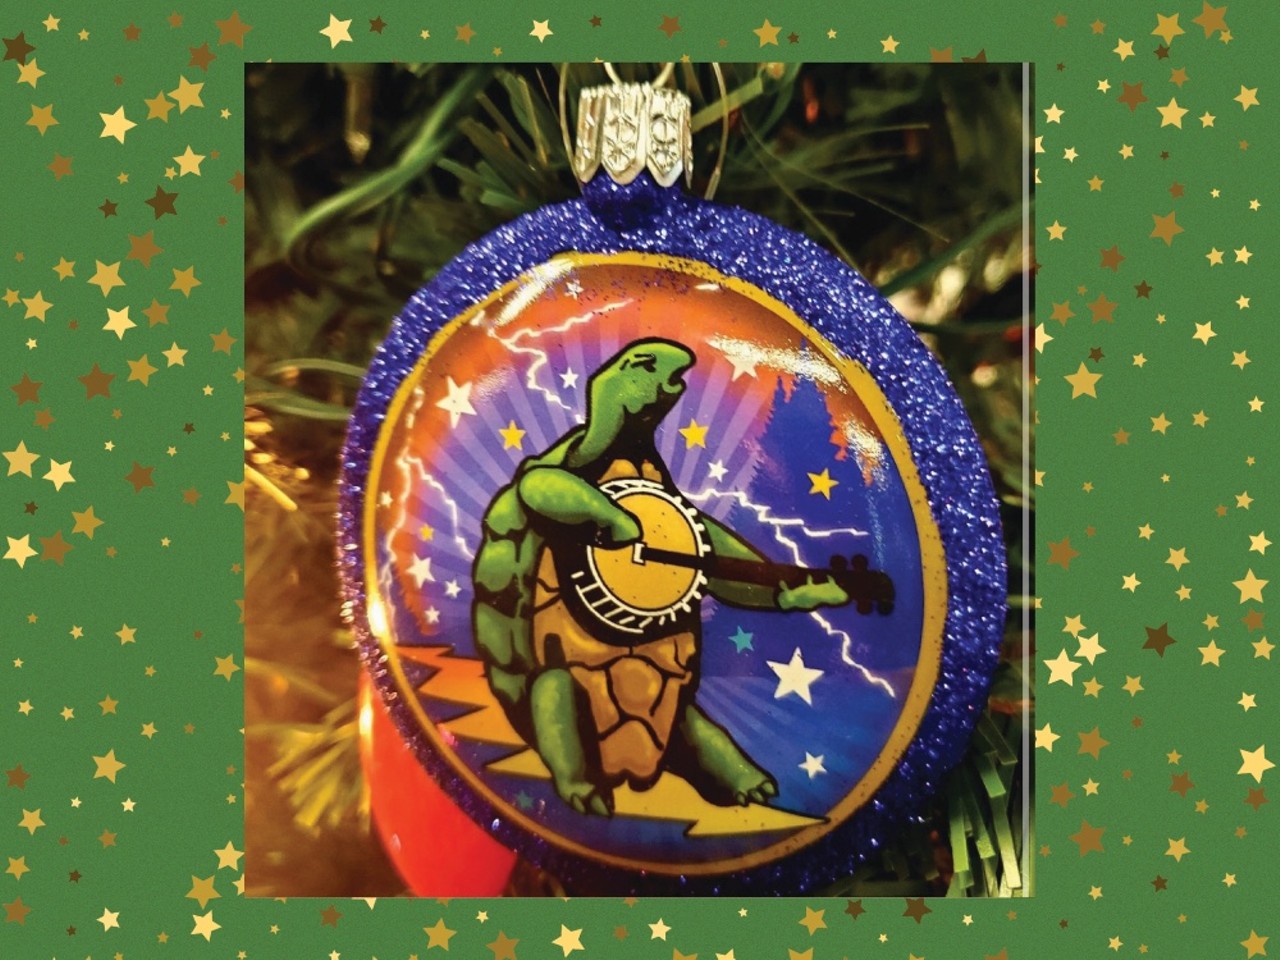 Grateful Dead Ornament from Sunshine Daydream: $6.99
(multiple locations, including 6303 Delmar Boulevard, sunshinedaydream.com) 
Deadheads love to show their dedication to their favorite band, Grateful Dead, even if that means sprucing up their Christmas tree with the famous Terrapin Turtle from the band&#146;s 1977 album Terrapin Station. Located on the Delmar Loop, Sunshine Daydream has plenty of Grateful Dead ornaments. But, there are also plenty of hippie ornaments, as well.
Photo credit: Sunshine Daydream